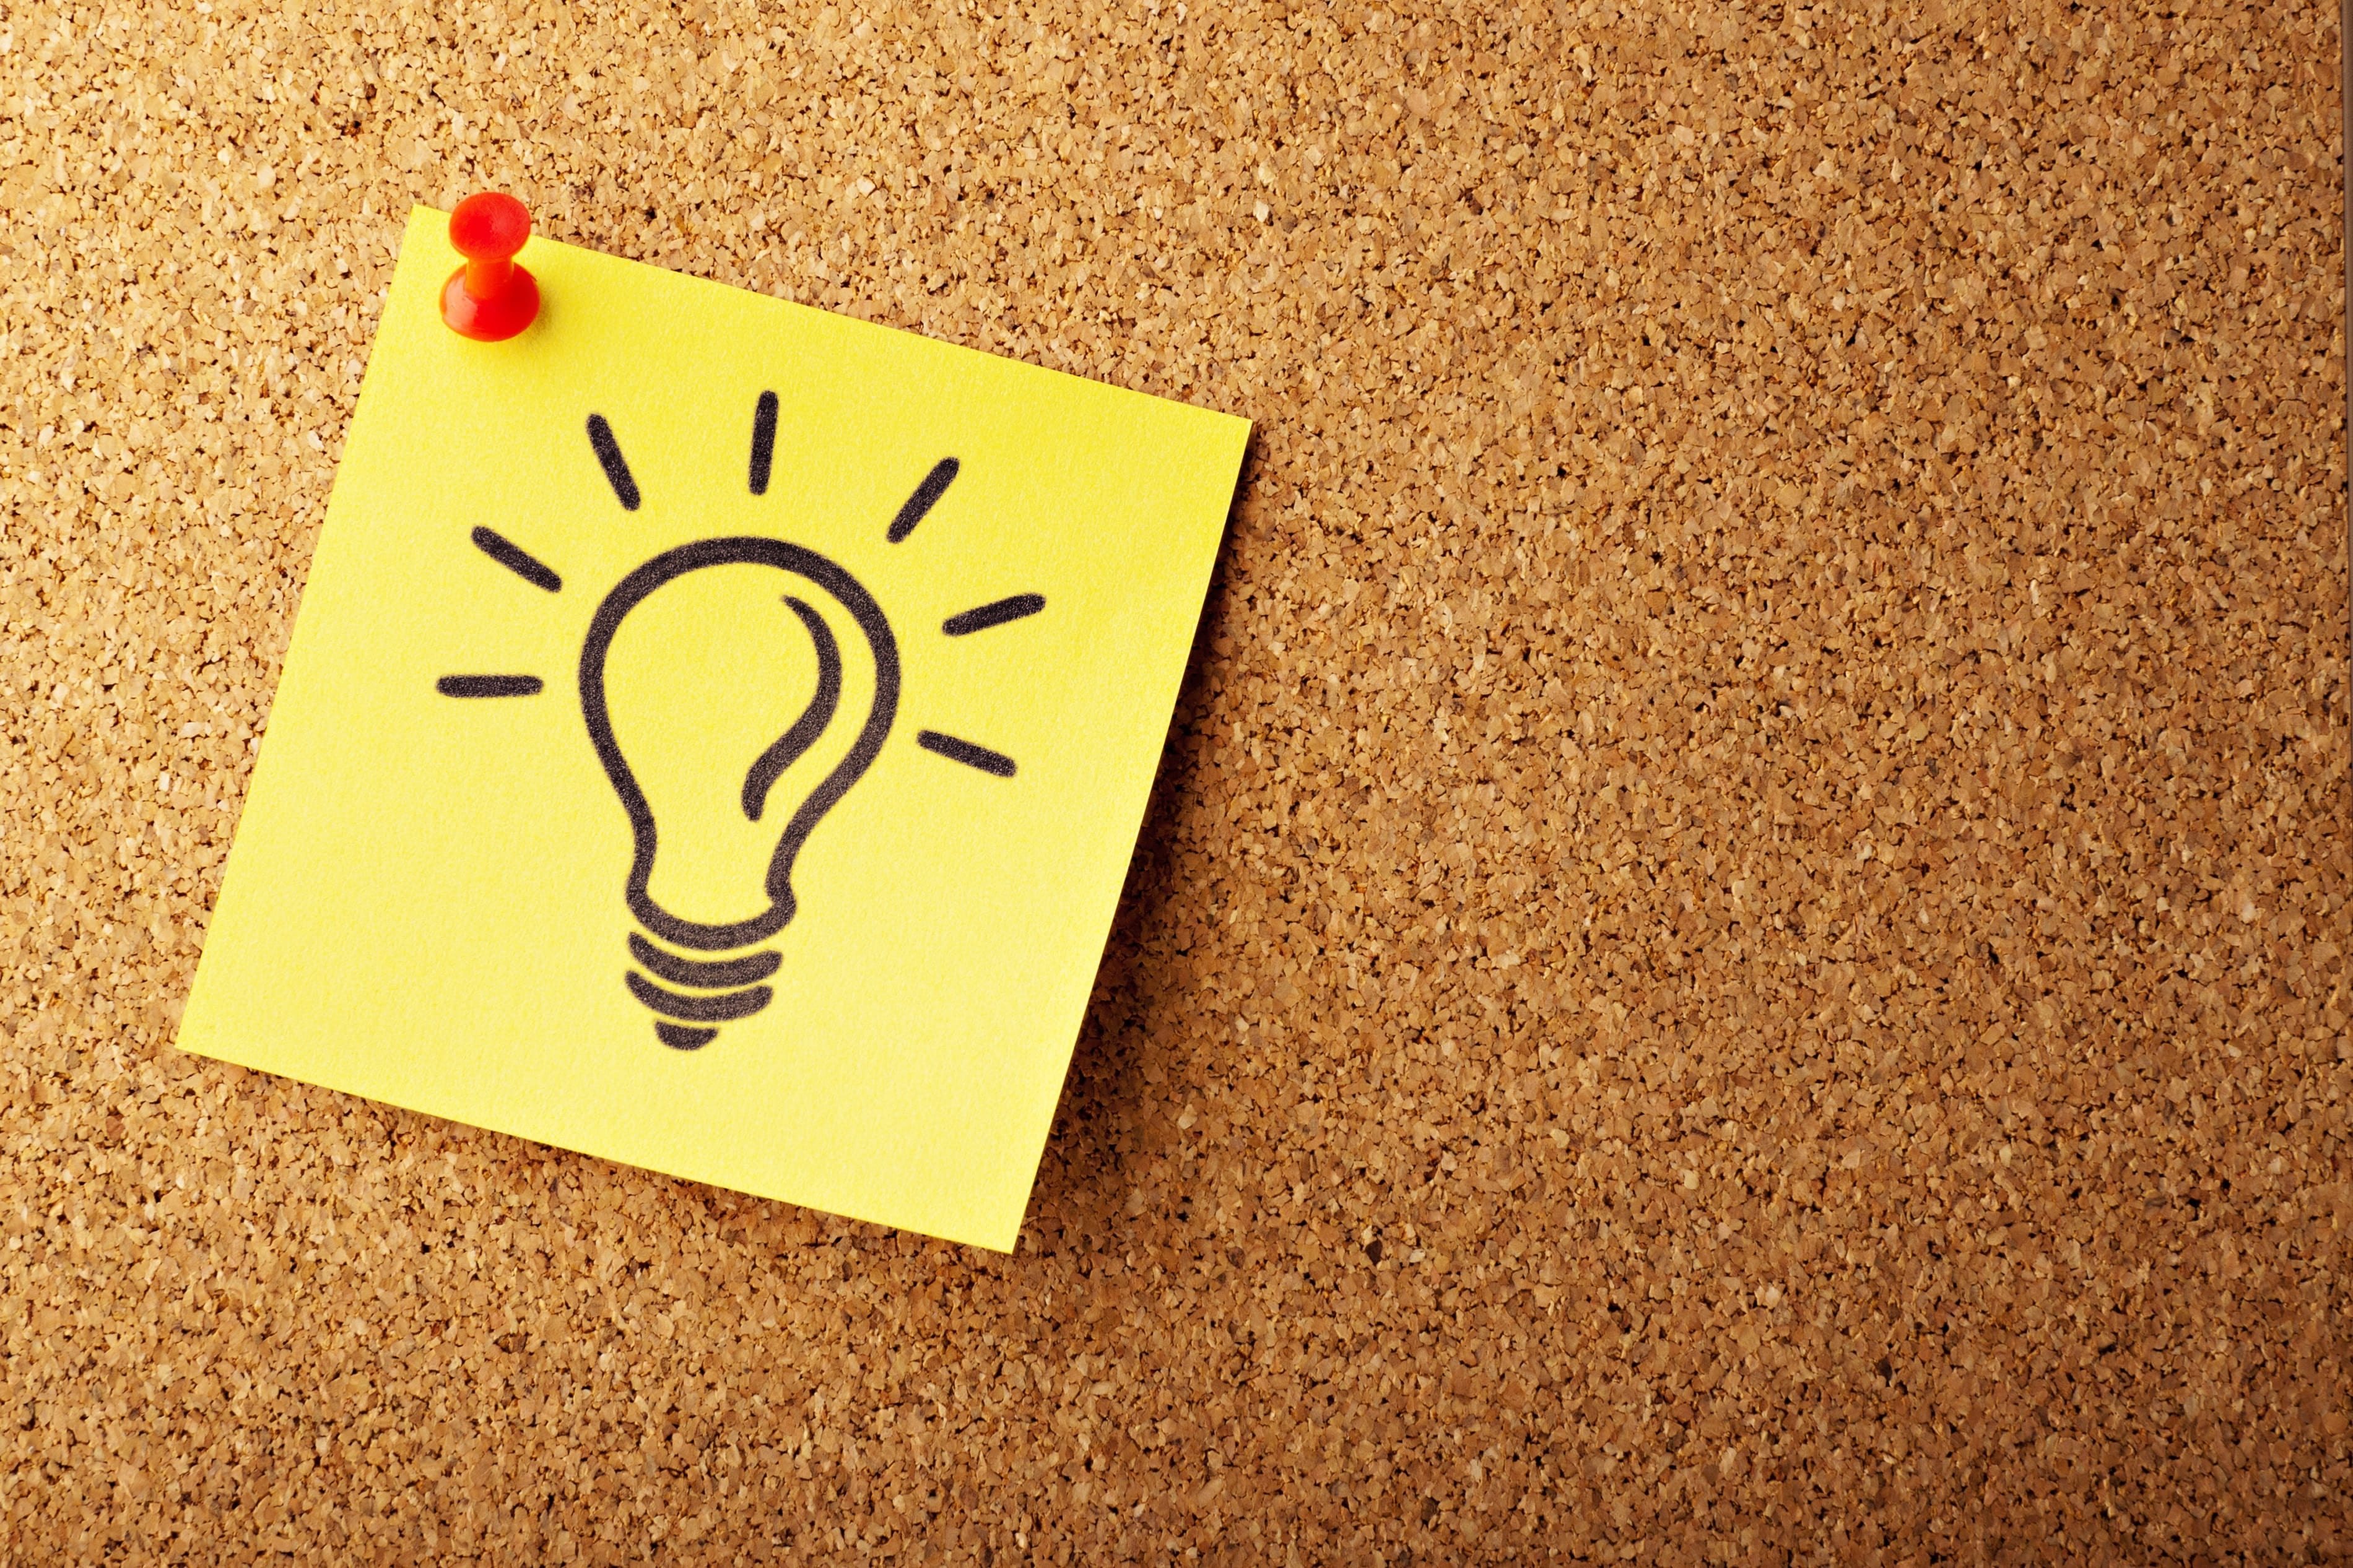 Yellow sticky note with a light bulb drawn on it tacked to a cork board; image by AbsolutVision, via Unsplash.com.